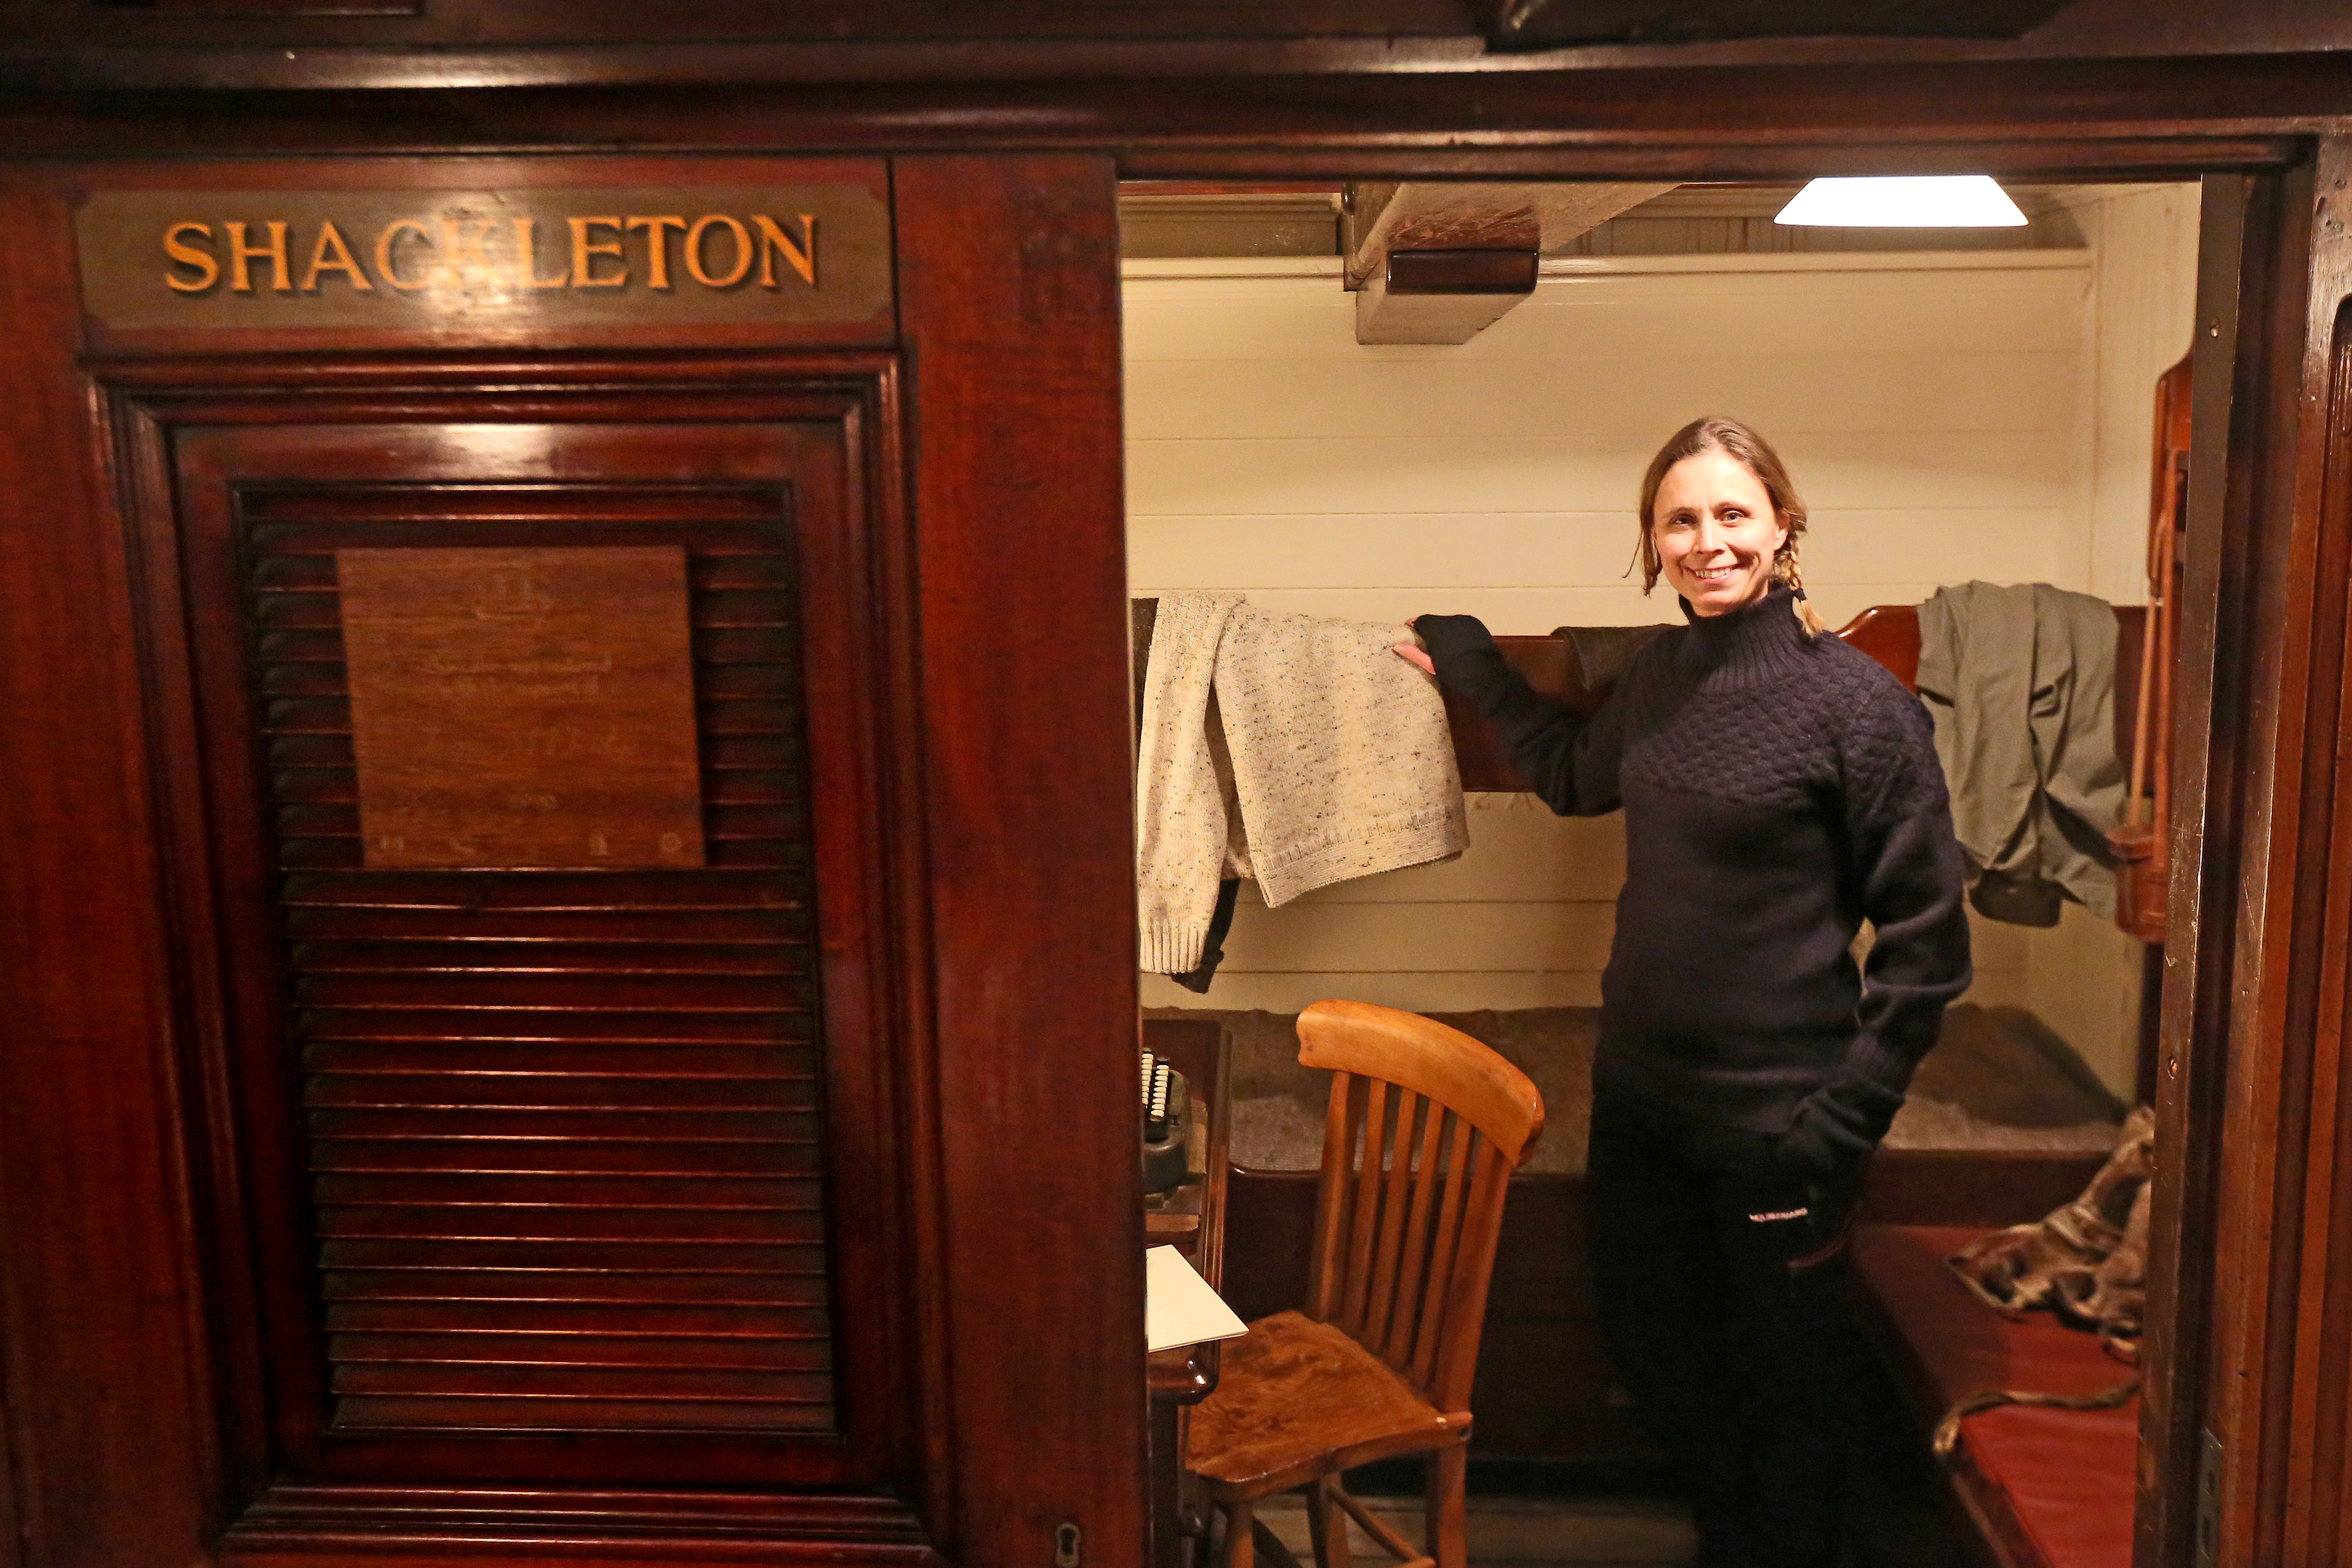 Wendy Searle was granted special access to Shackleton's personal cabin